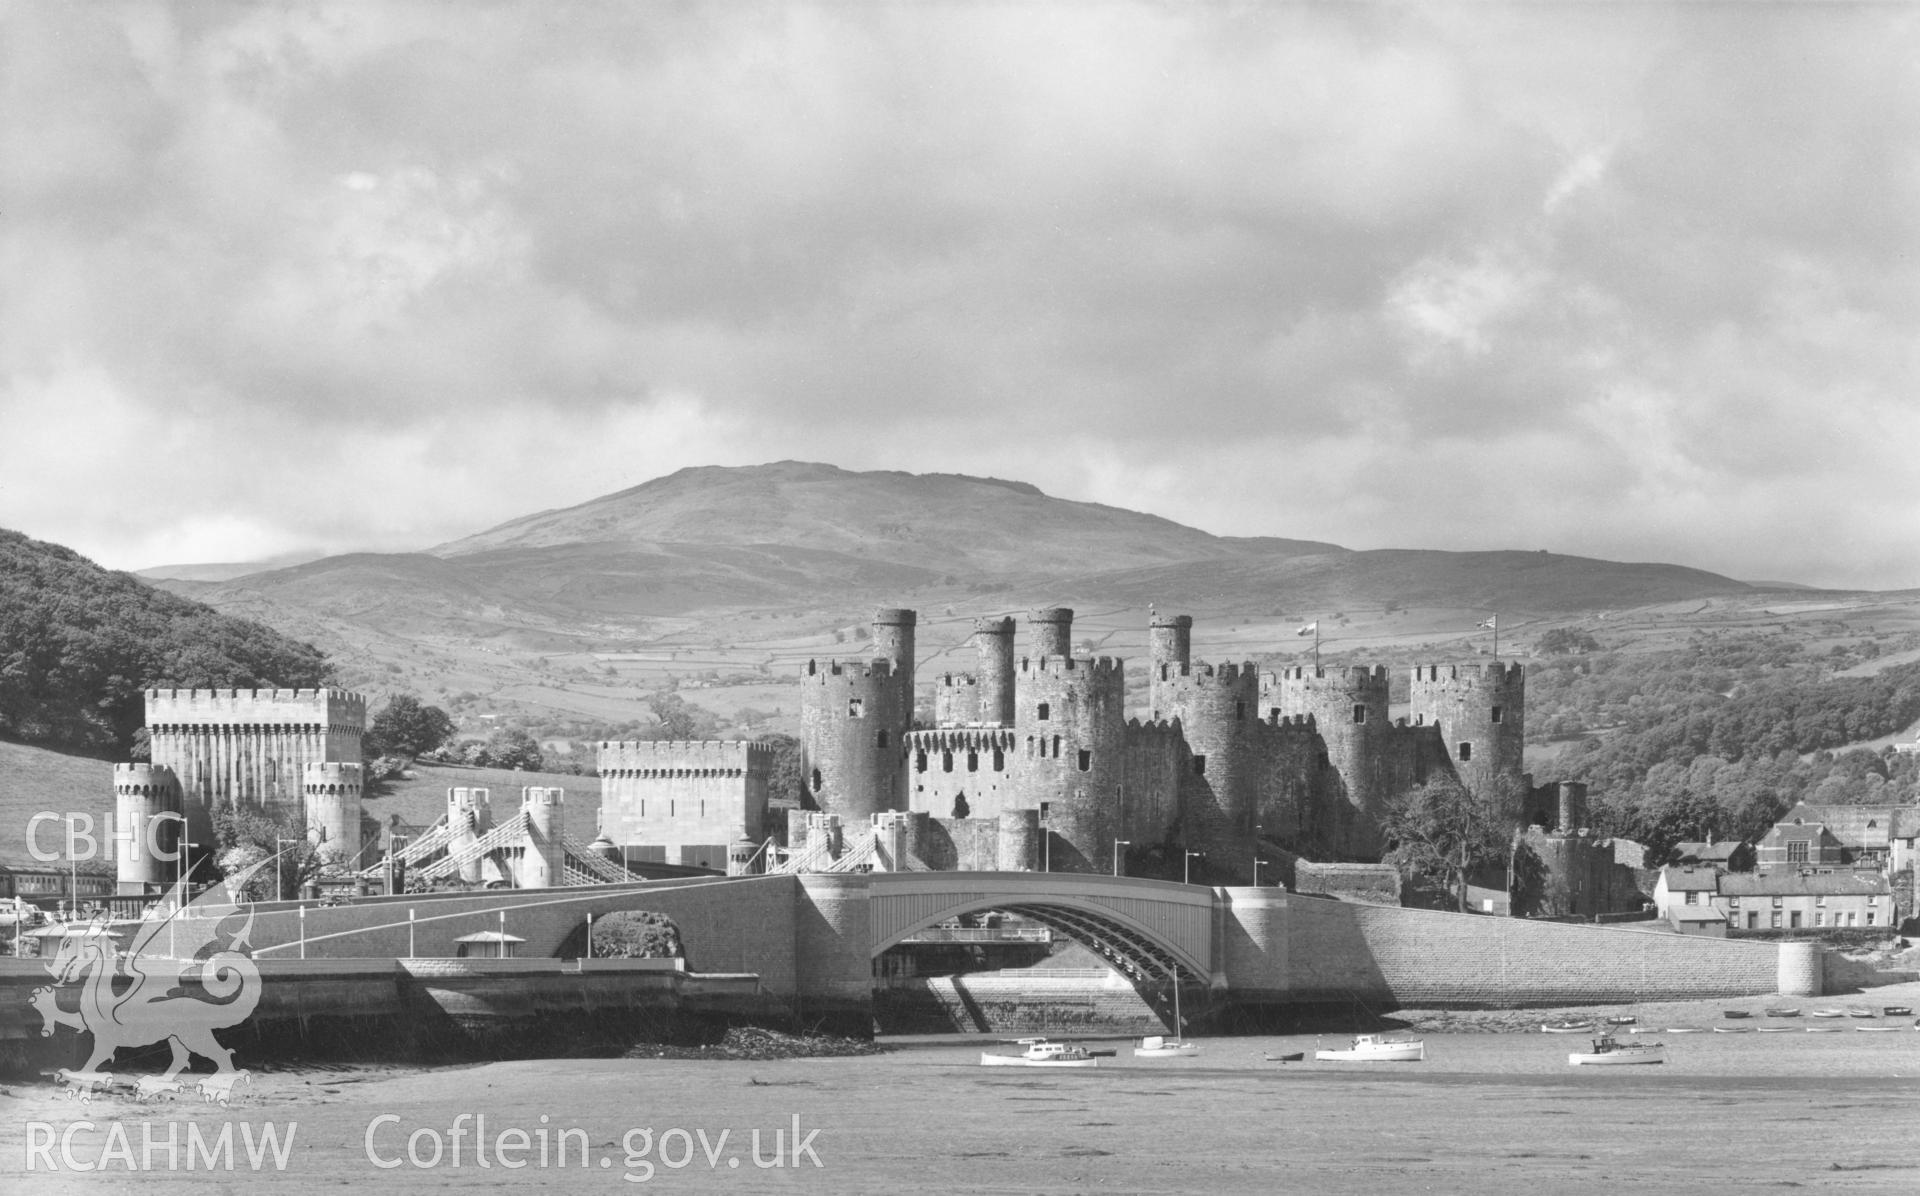 1 b/w print showing view of Conwy castle and new road bridge, collated by the former Central Office of Information.